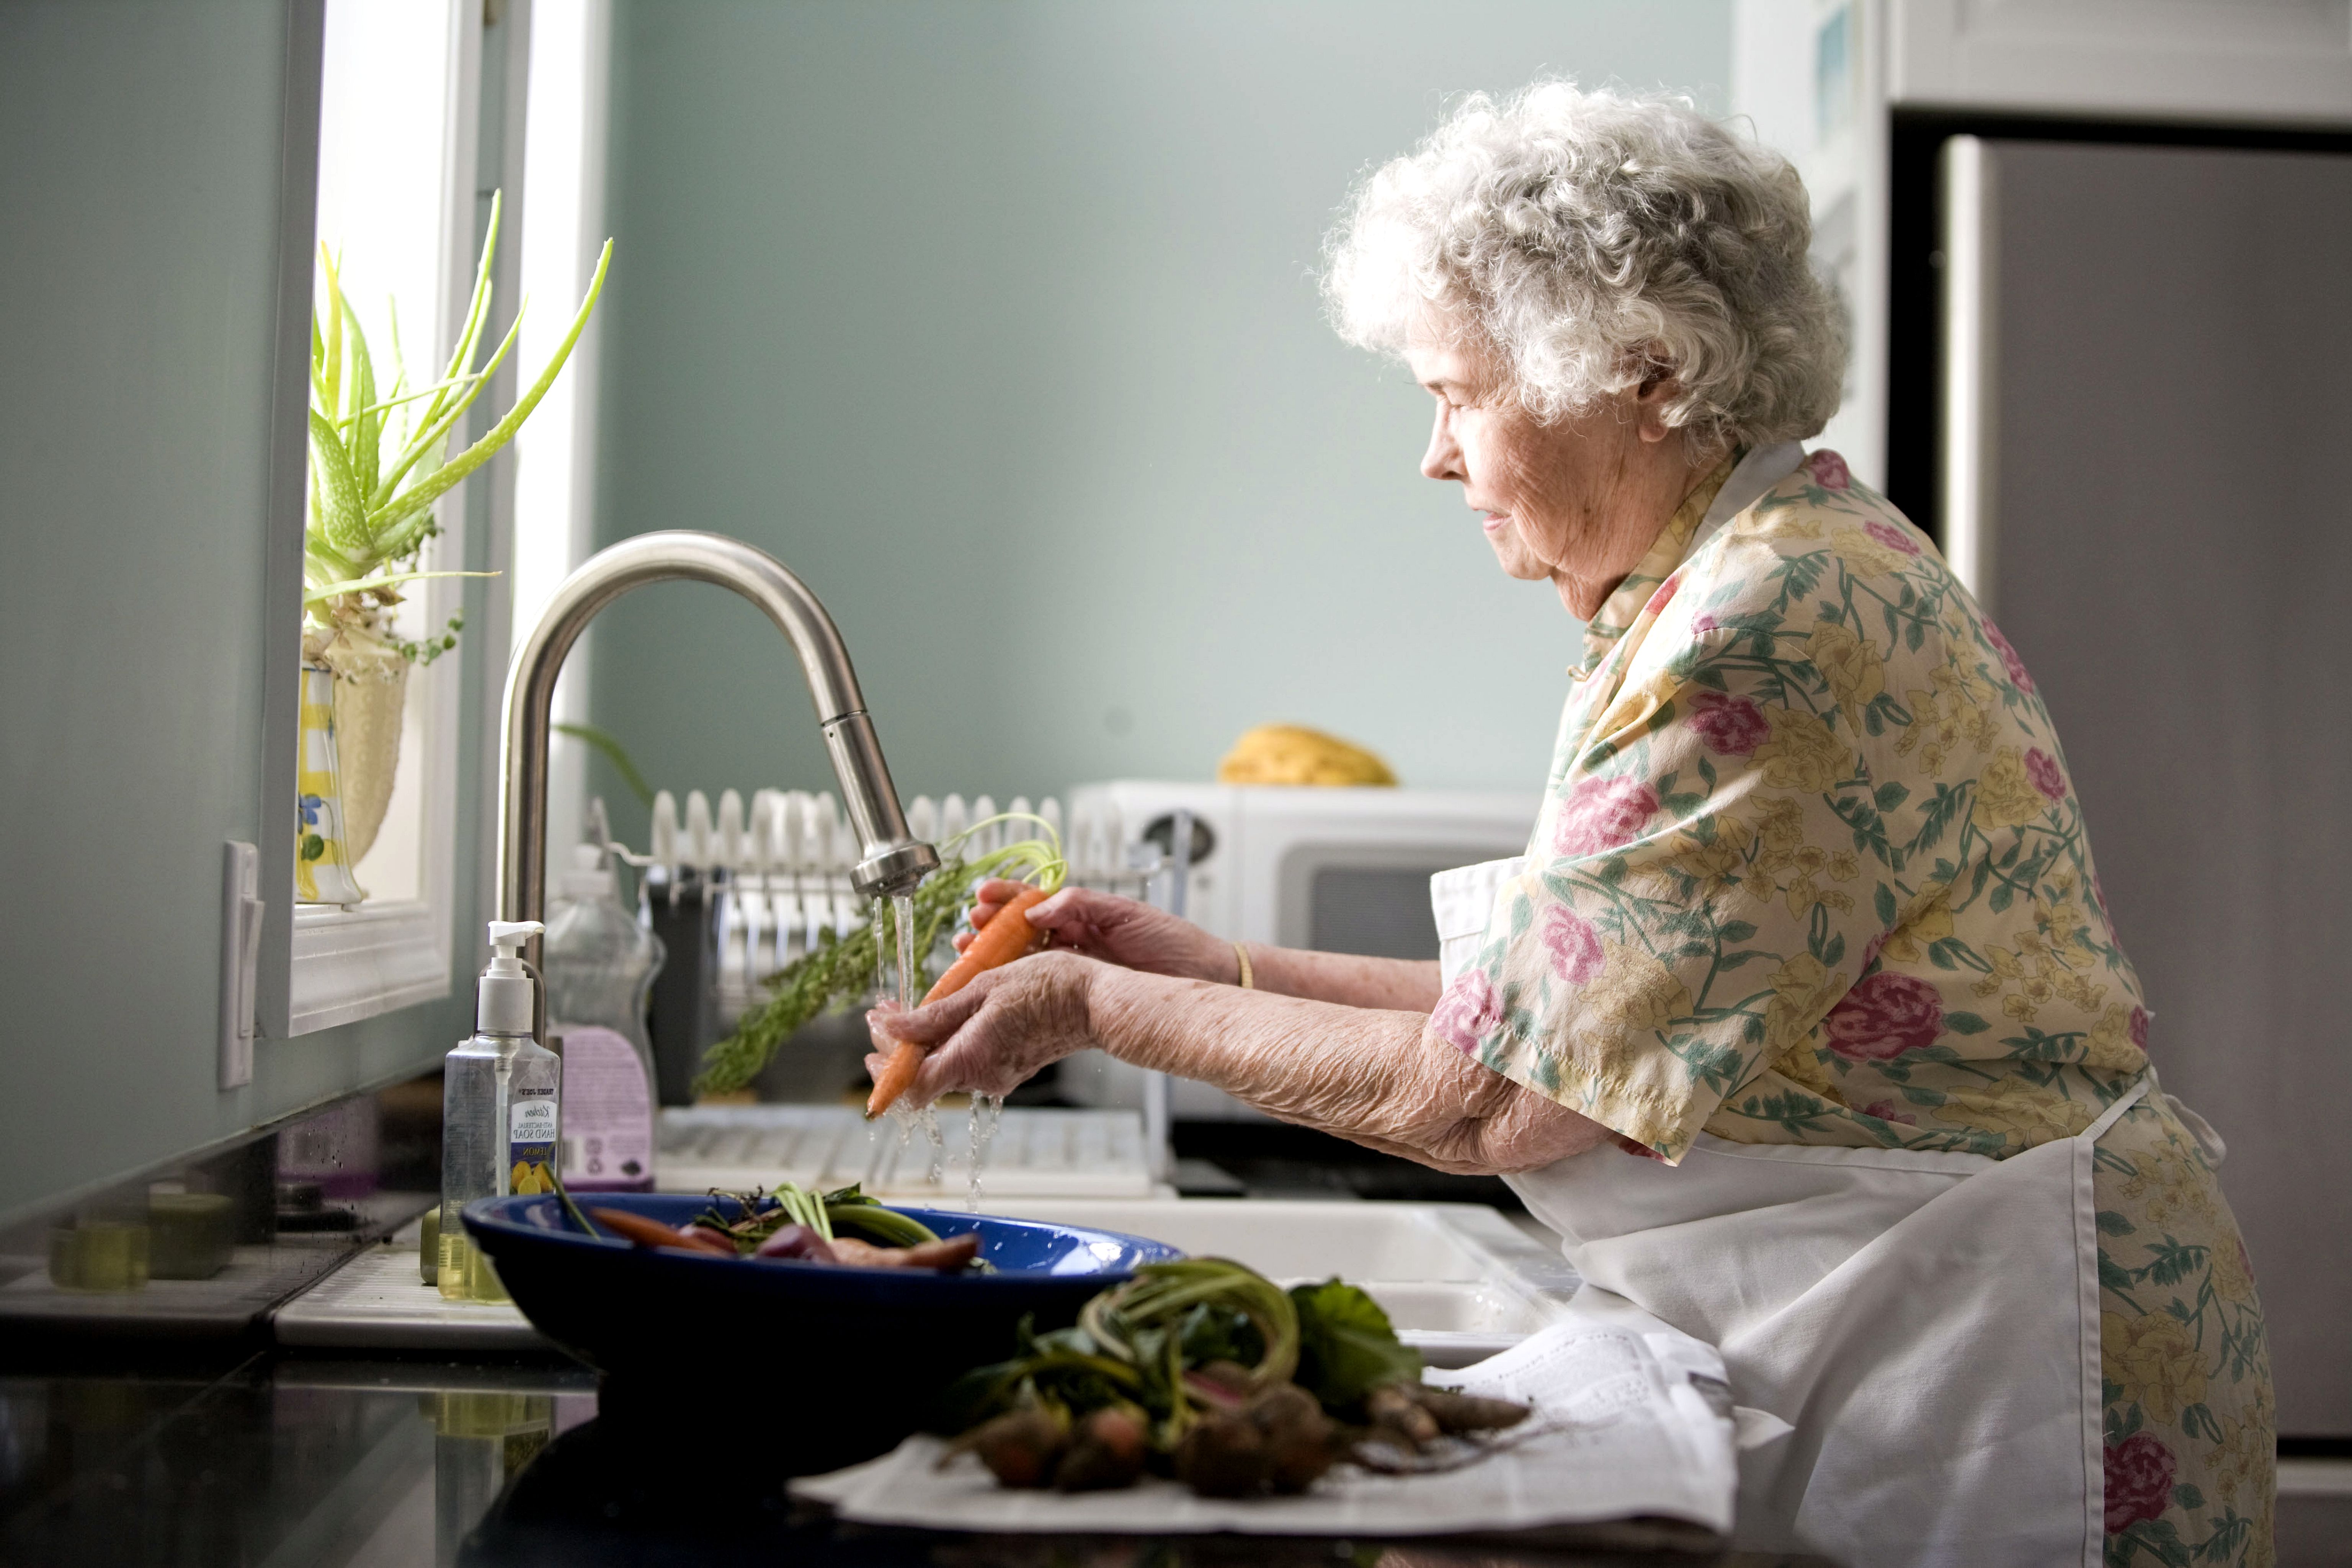 https://pixnio.com/free-images/people/female-women/elderly-woman-in-kitchen-in-process-of-washing-food-with-fresh-water.jpg